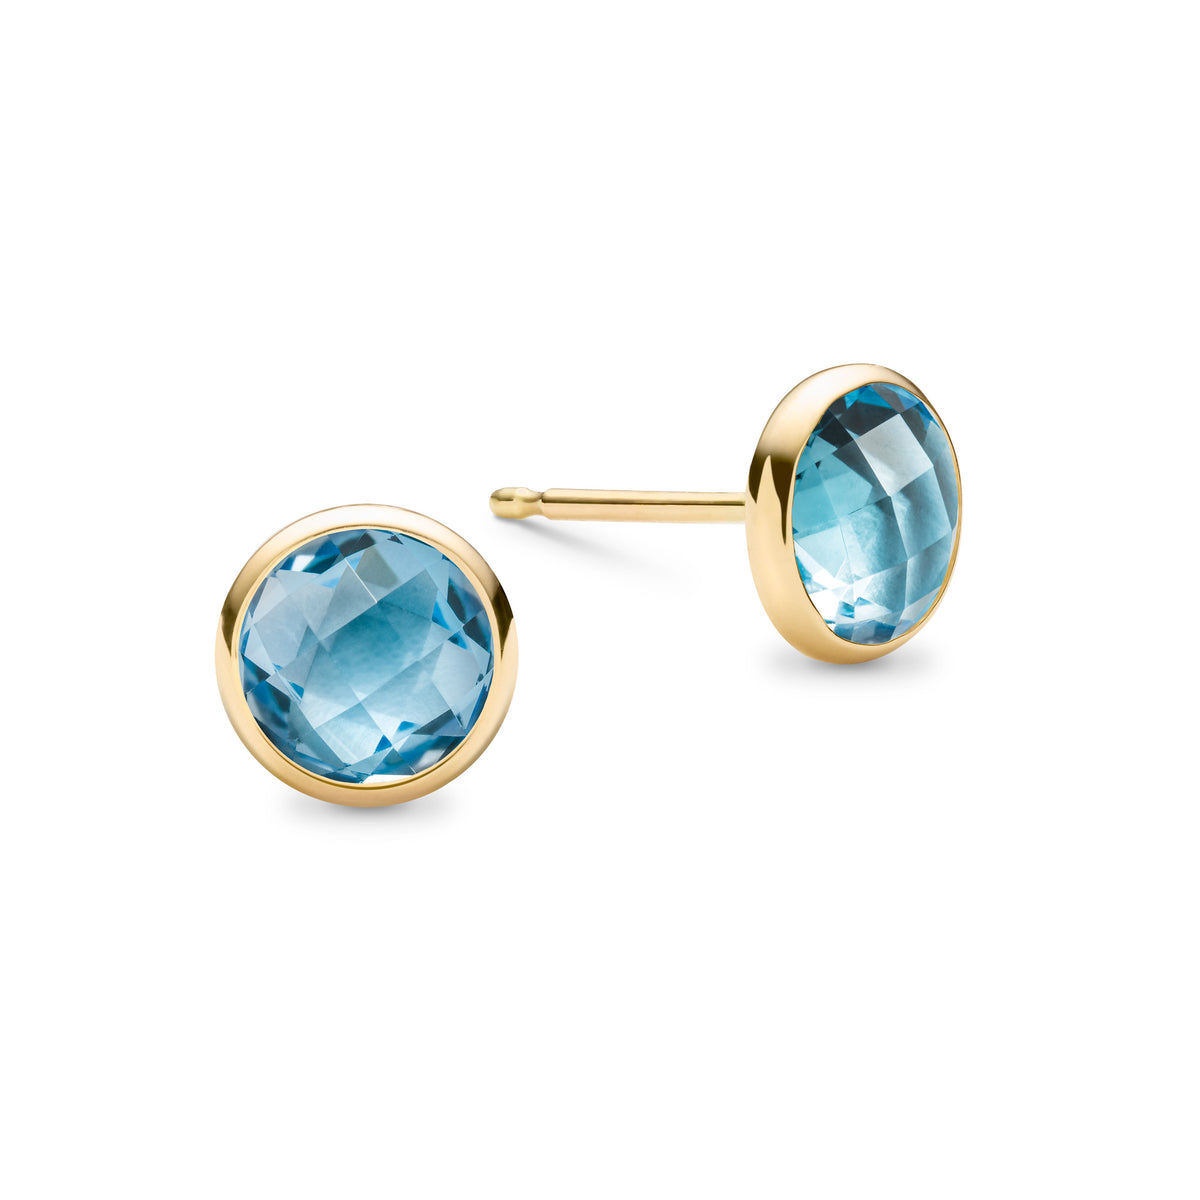 Galaxy Gold GG 16.50 CT. 14k White Gold Fish Hook Earrings with Blue Topaz